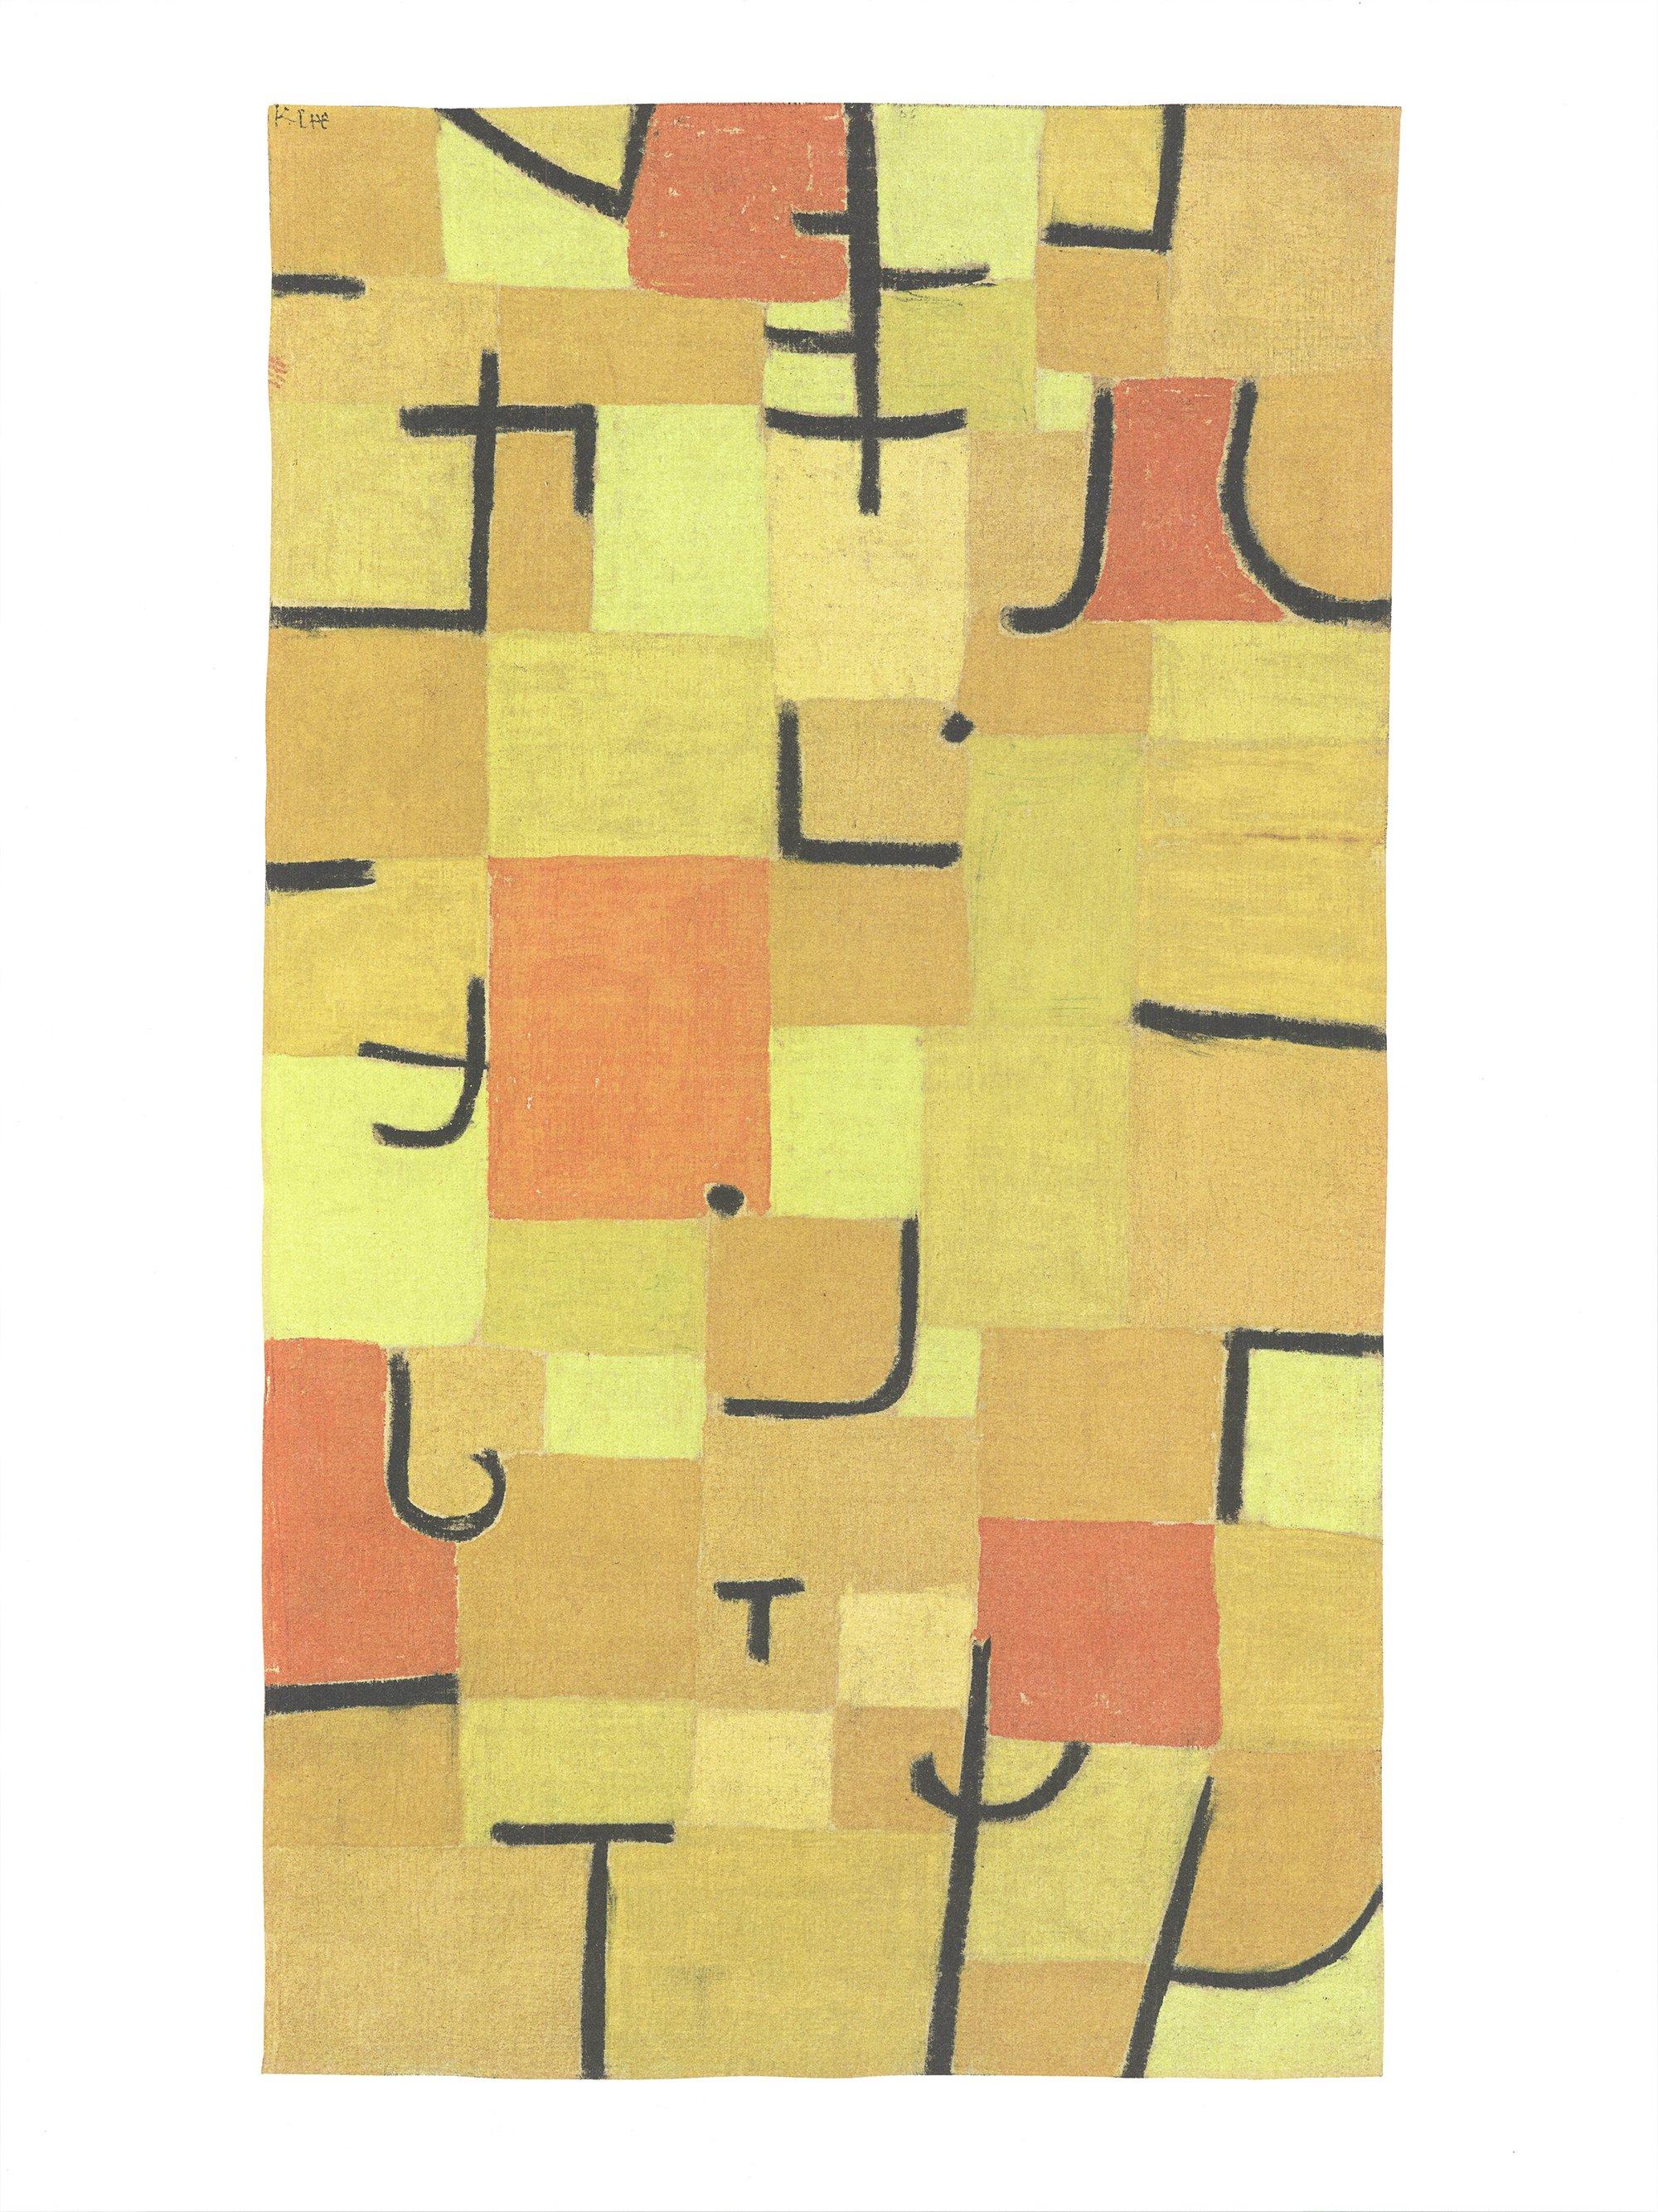 paul klee characters in yellow